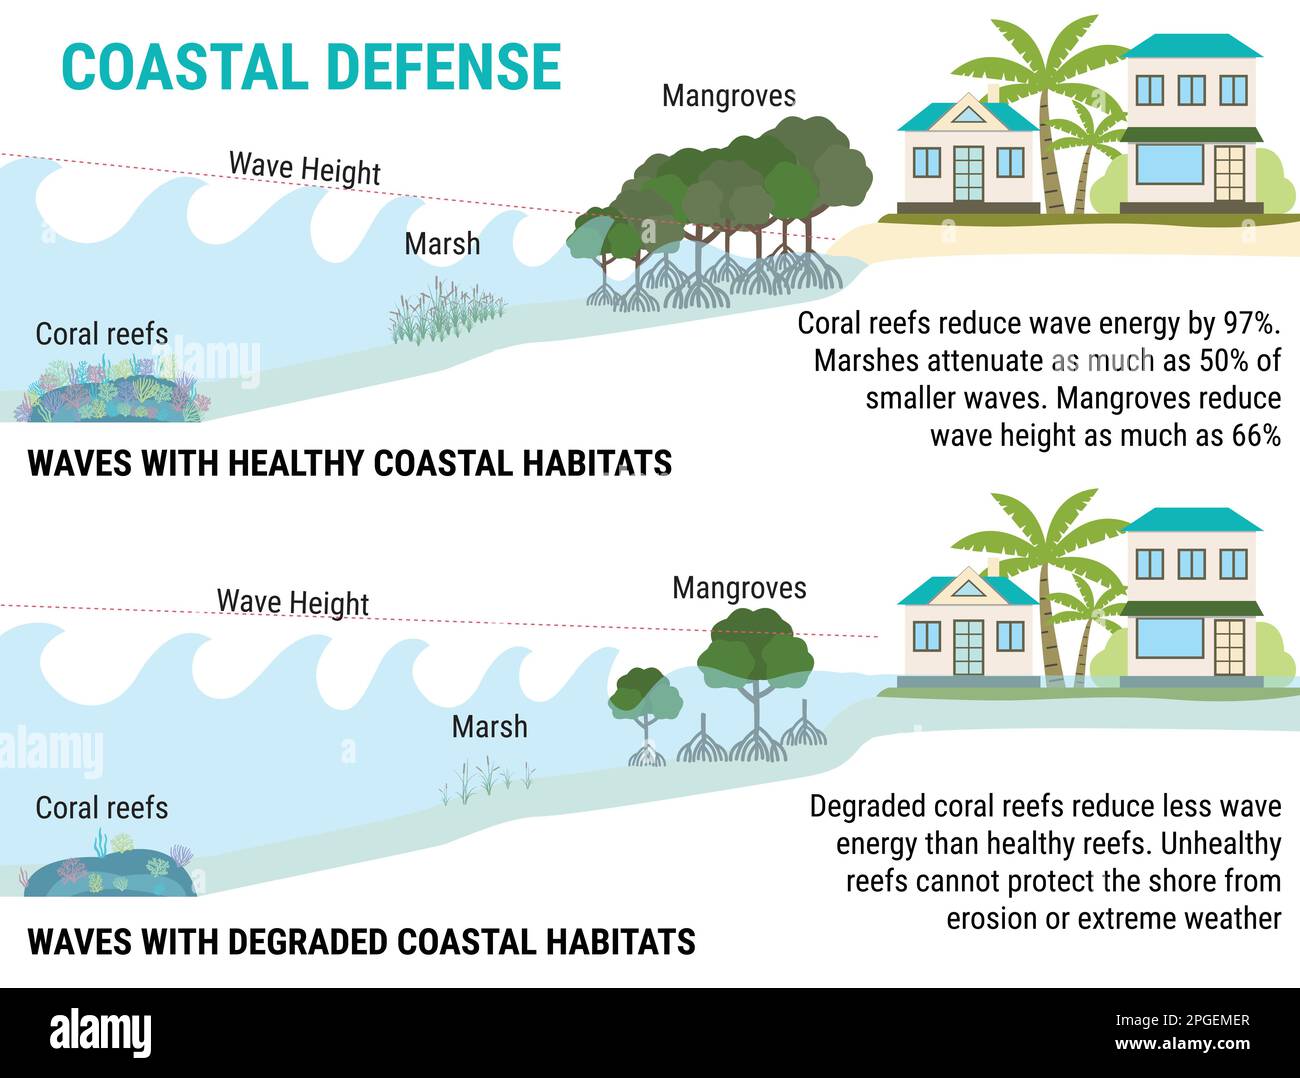 Sea Level Rise infographic. Coastal defenses to sea level rising - mangroves, marshes, coral reefs, dikes. Flood protection. Global warming and climat Stock Vector